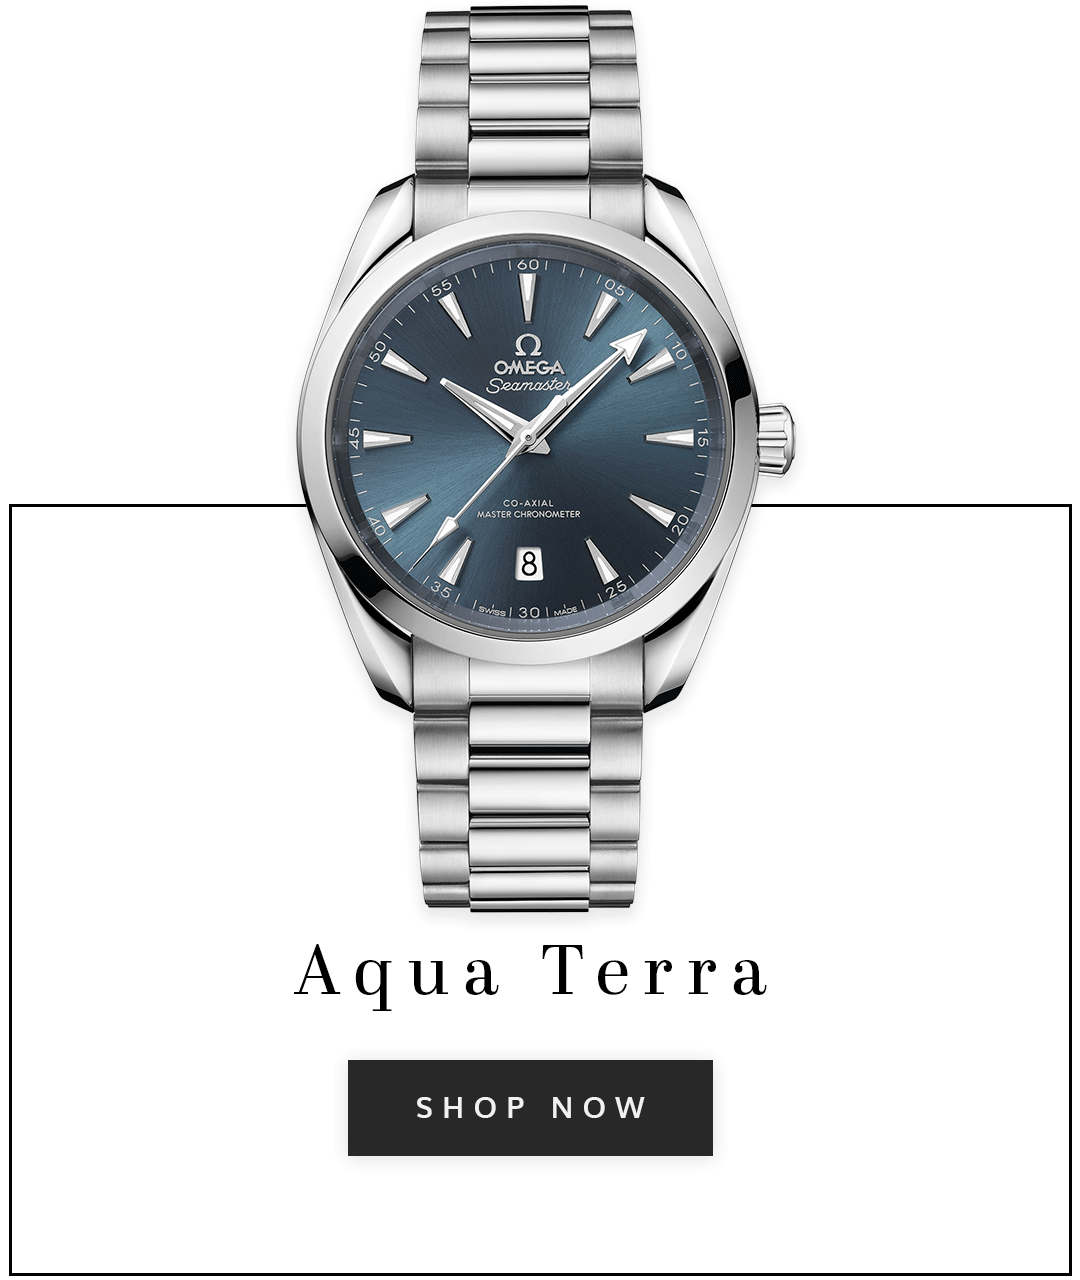 An OMEGA seamaster aqua terra watch with text shop now